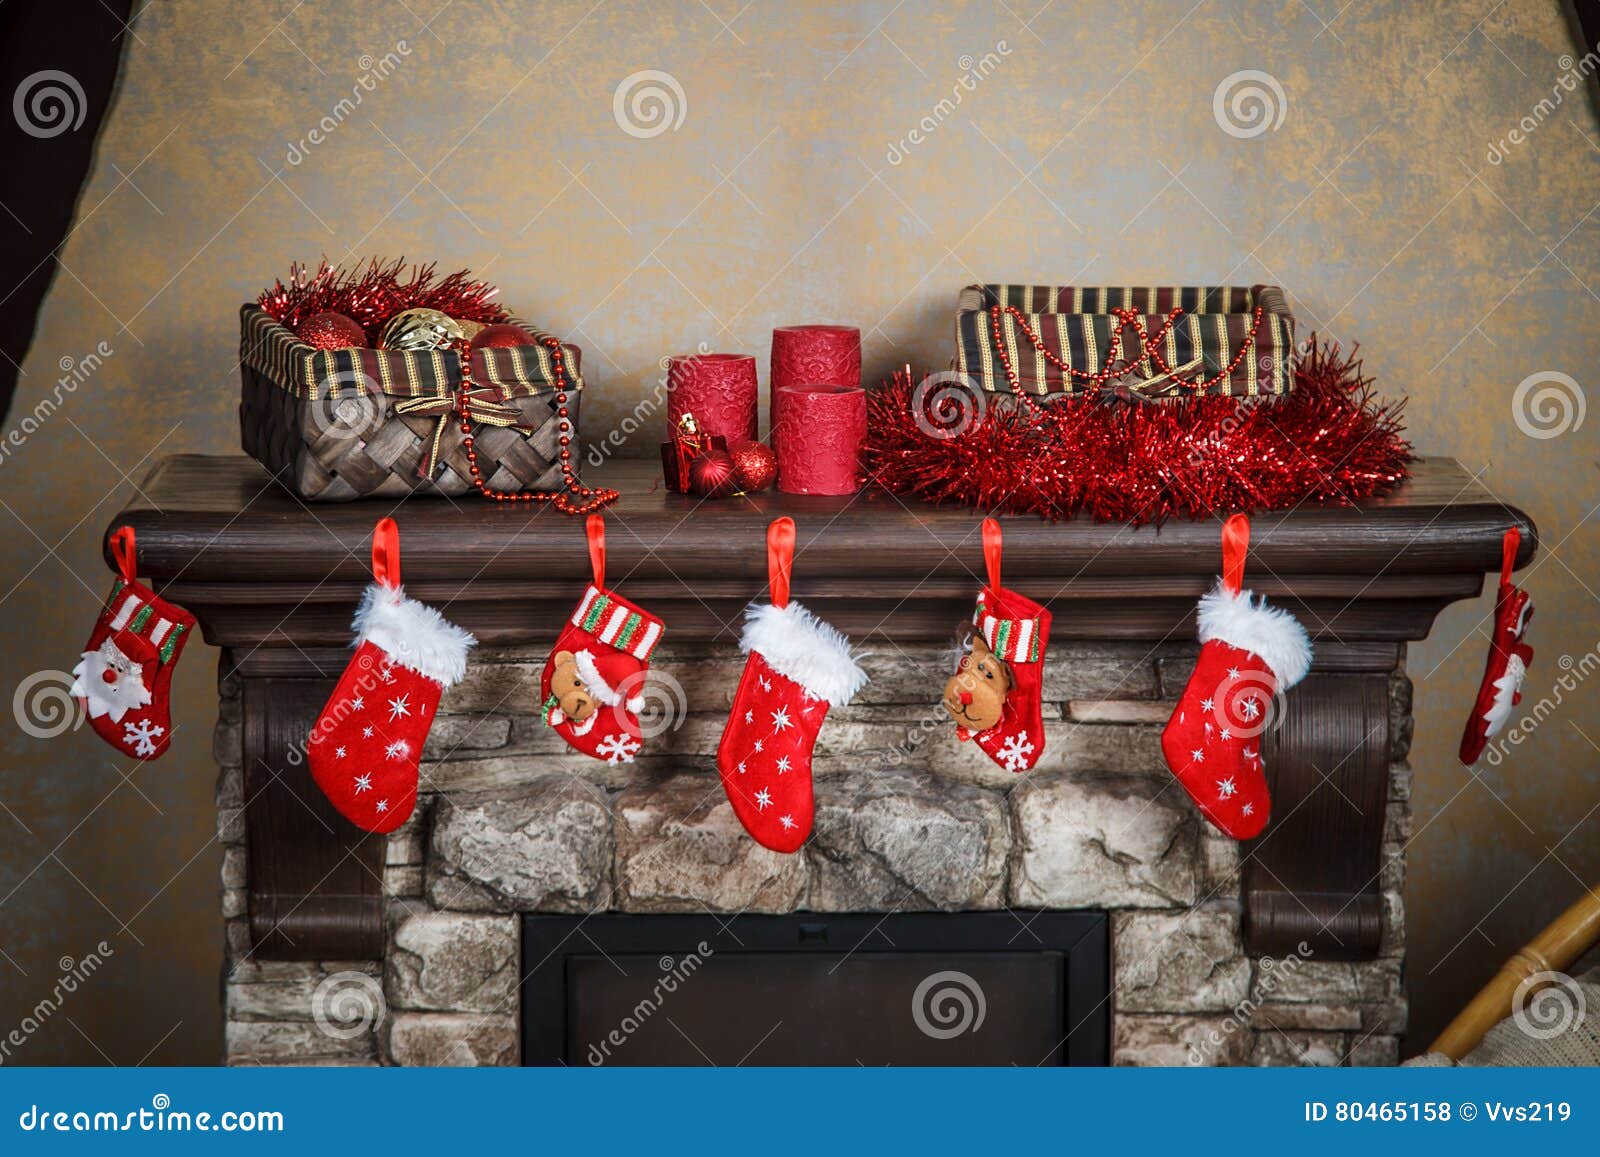 christmas red stocking hanging from a mantel or fireplace, decor